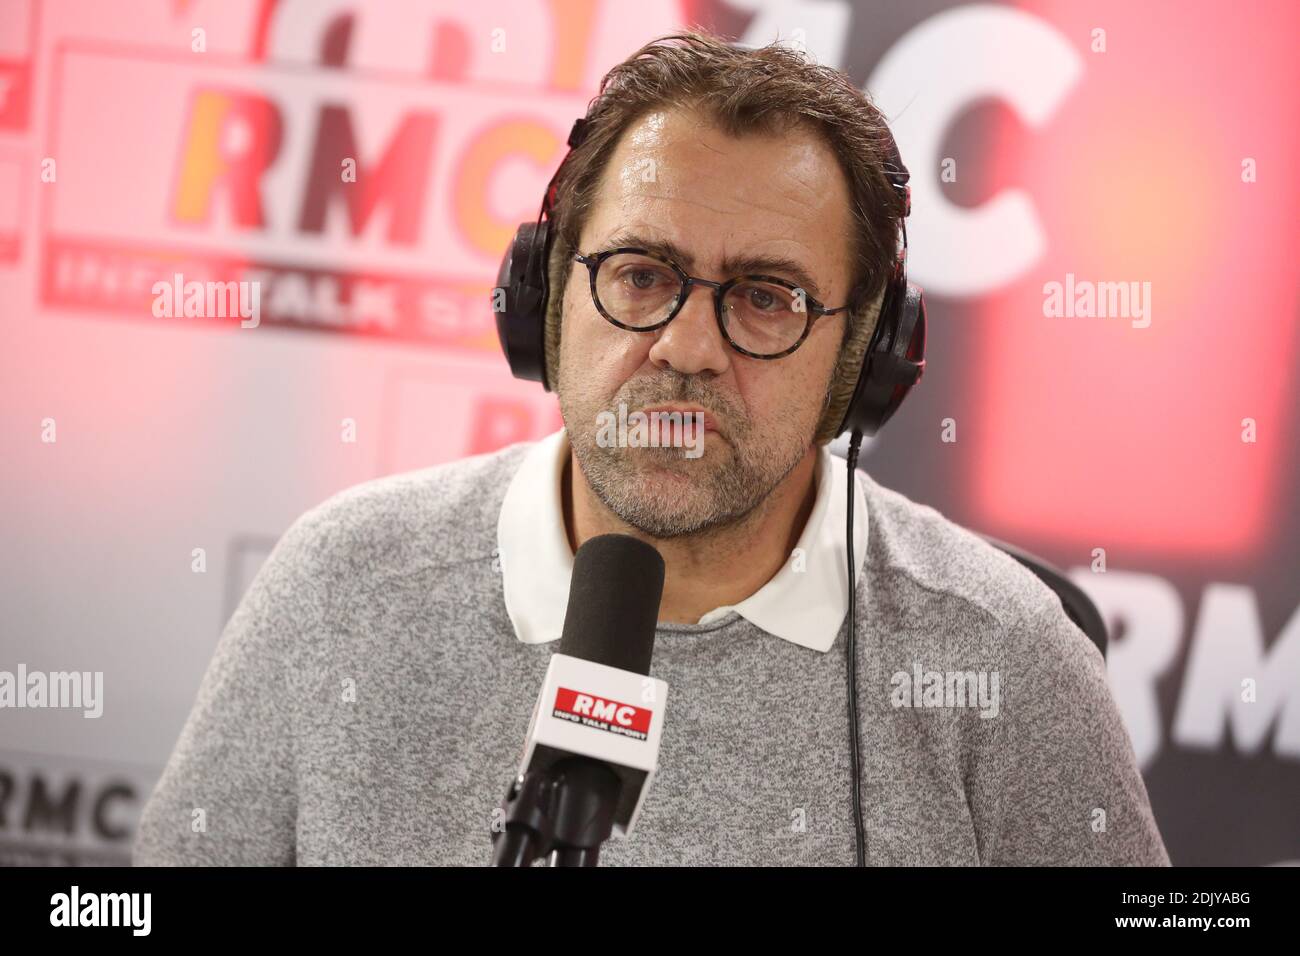 Exclusive - Michel Sarran at the 'Moscato Show' sport talk show on RMC Radio,  interviewed by Vincent Moscato, Maryse Ewanje-Epee, Pierre Dorian, Adrien  Aigoin et Denis Charvet in Paris, France, on December